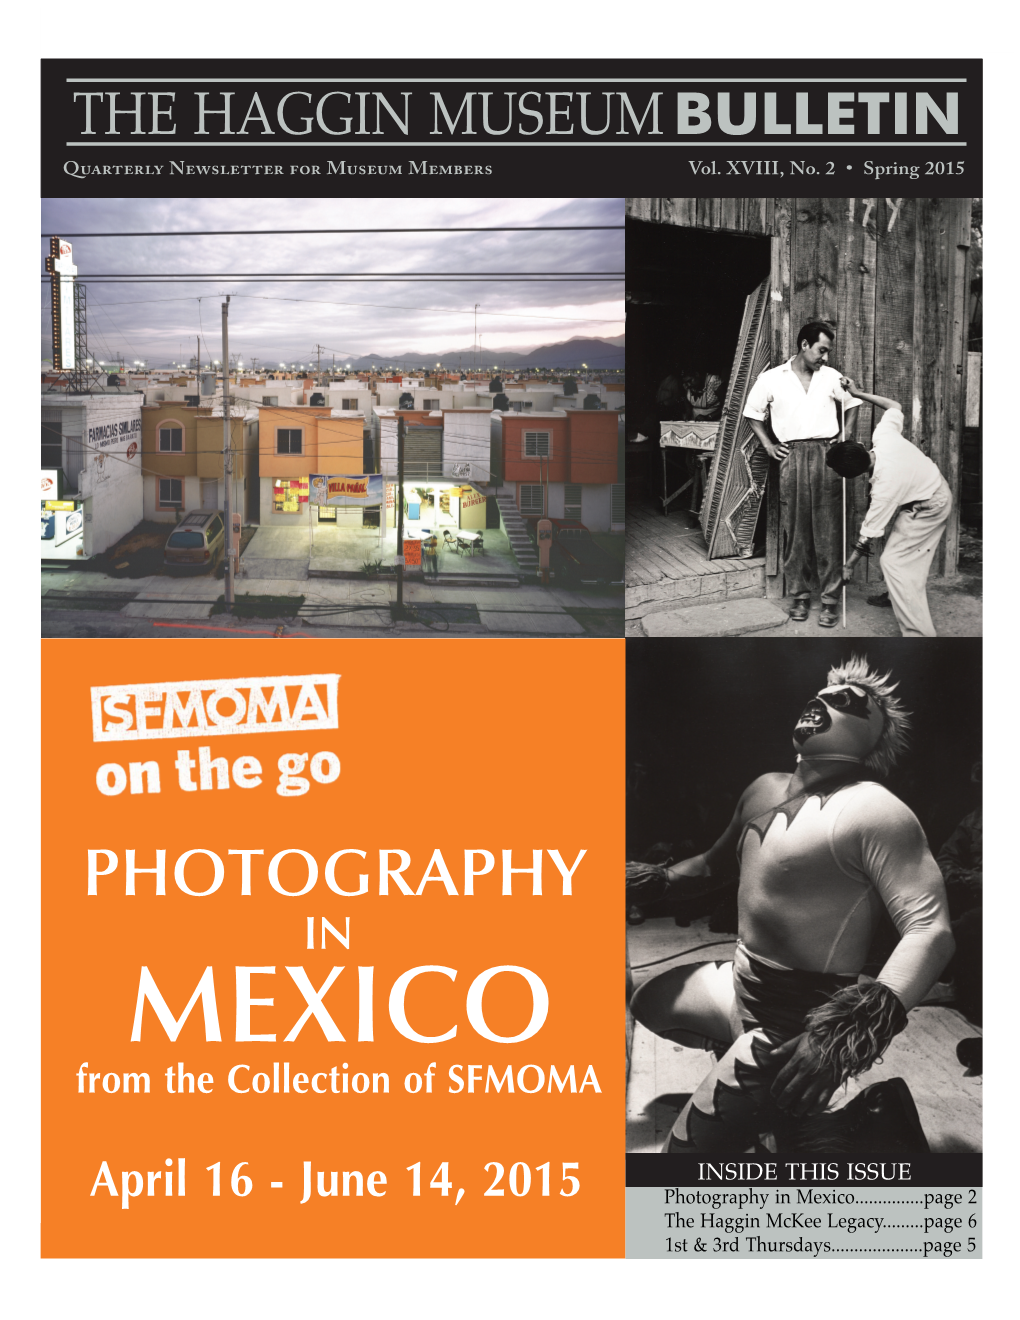 MEXICO from the Collection of SFMOMA